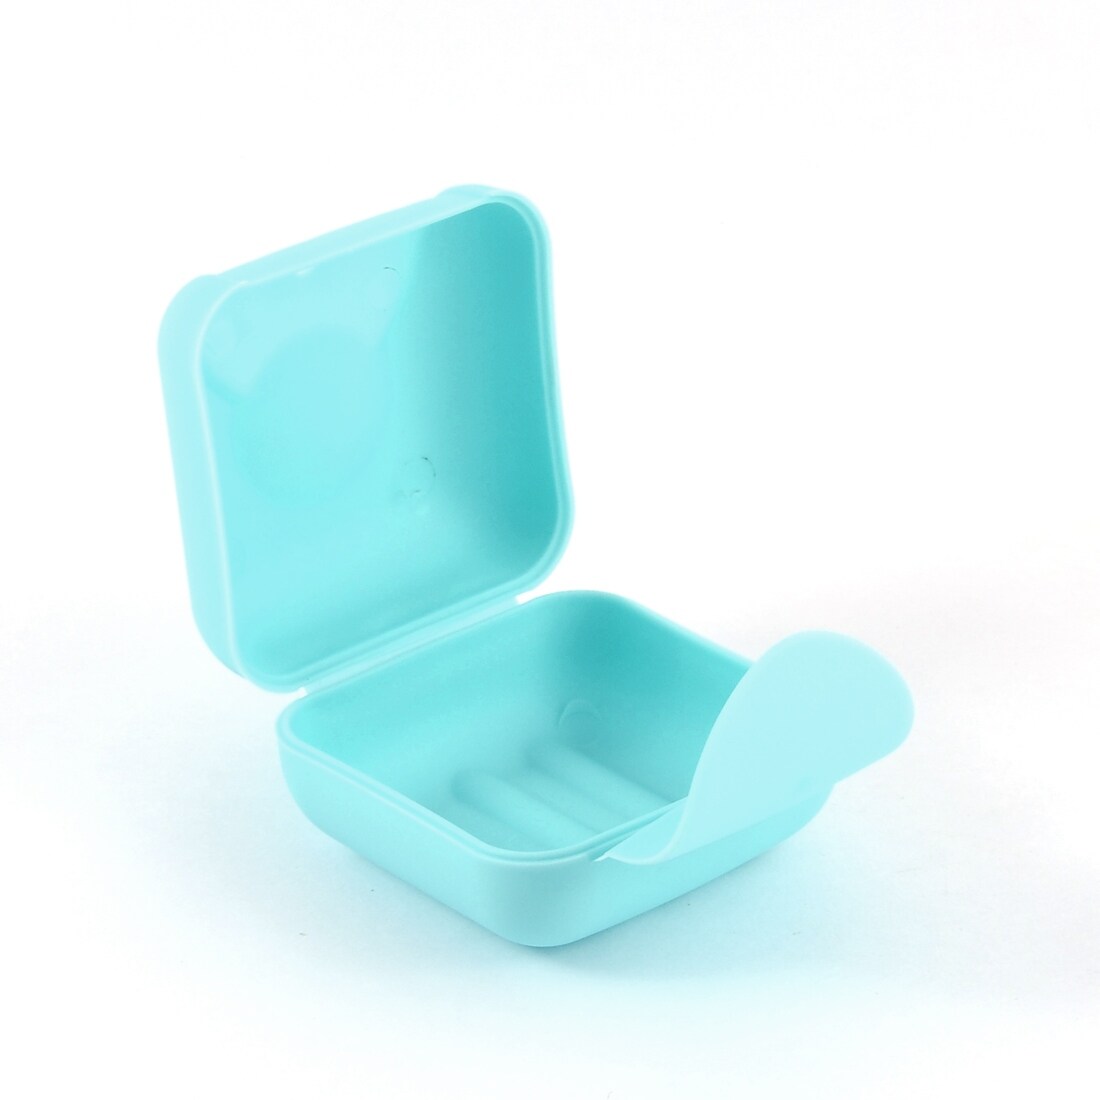 https://ak1.ostkcdn.com/images/products/is/images/direct/d125413f302f287f2b36324f12c620f6c7871729/Plastic-Houseware-Travel-Mini-Soap-Dish-Box-Holder-Case-Container.jpg